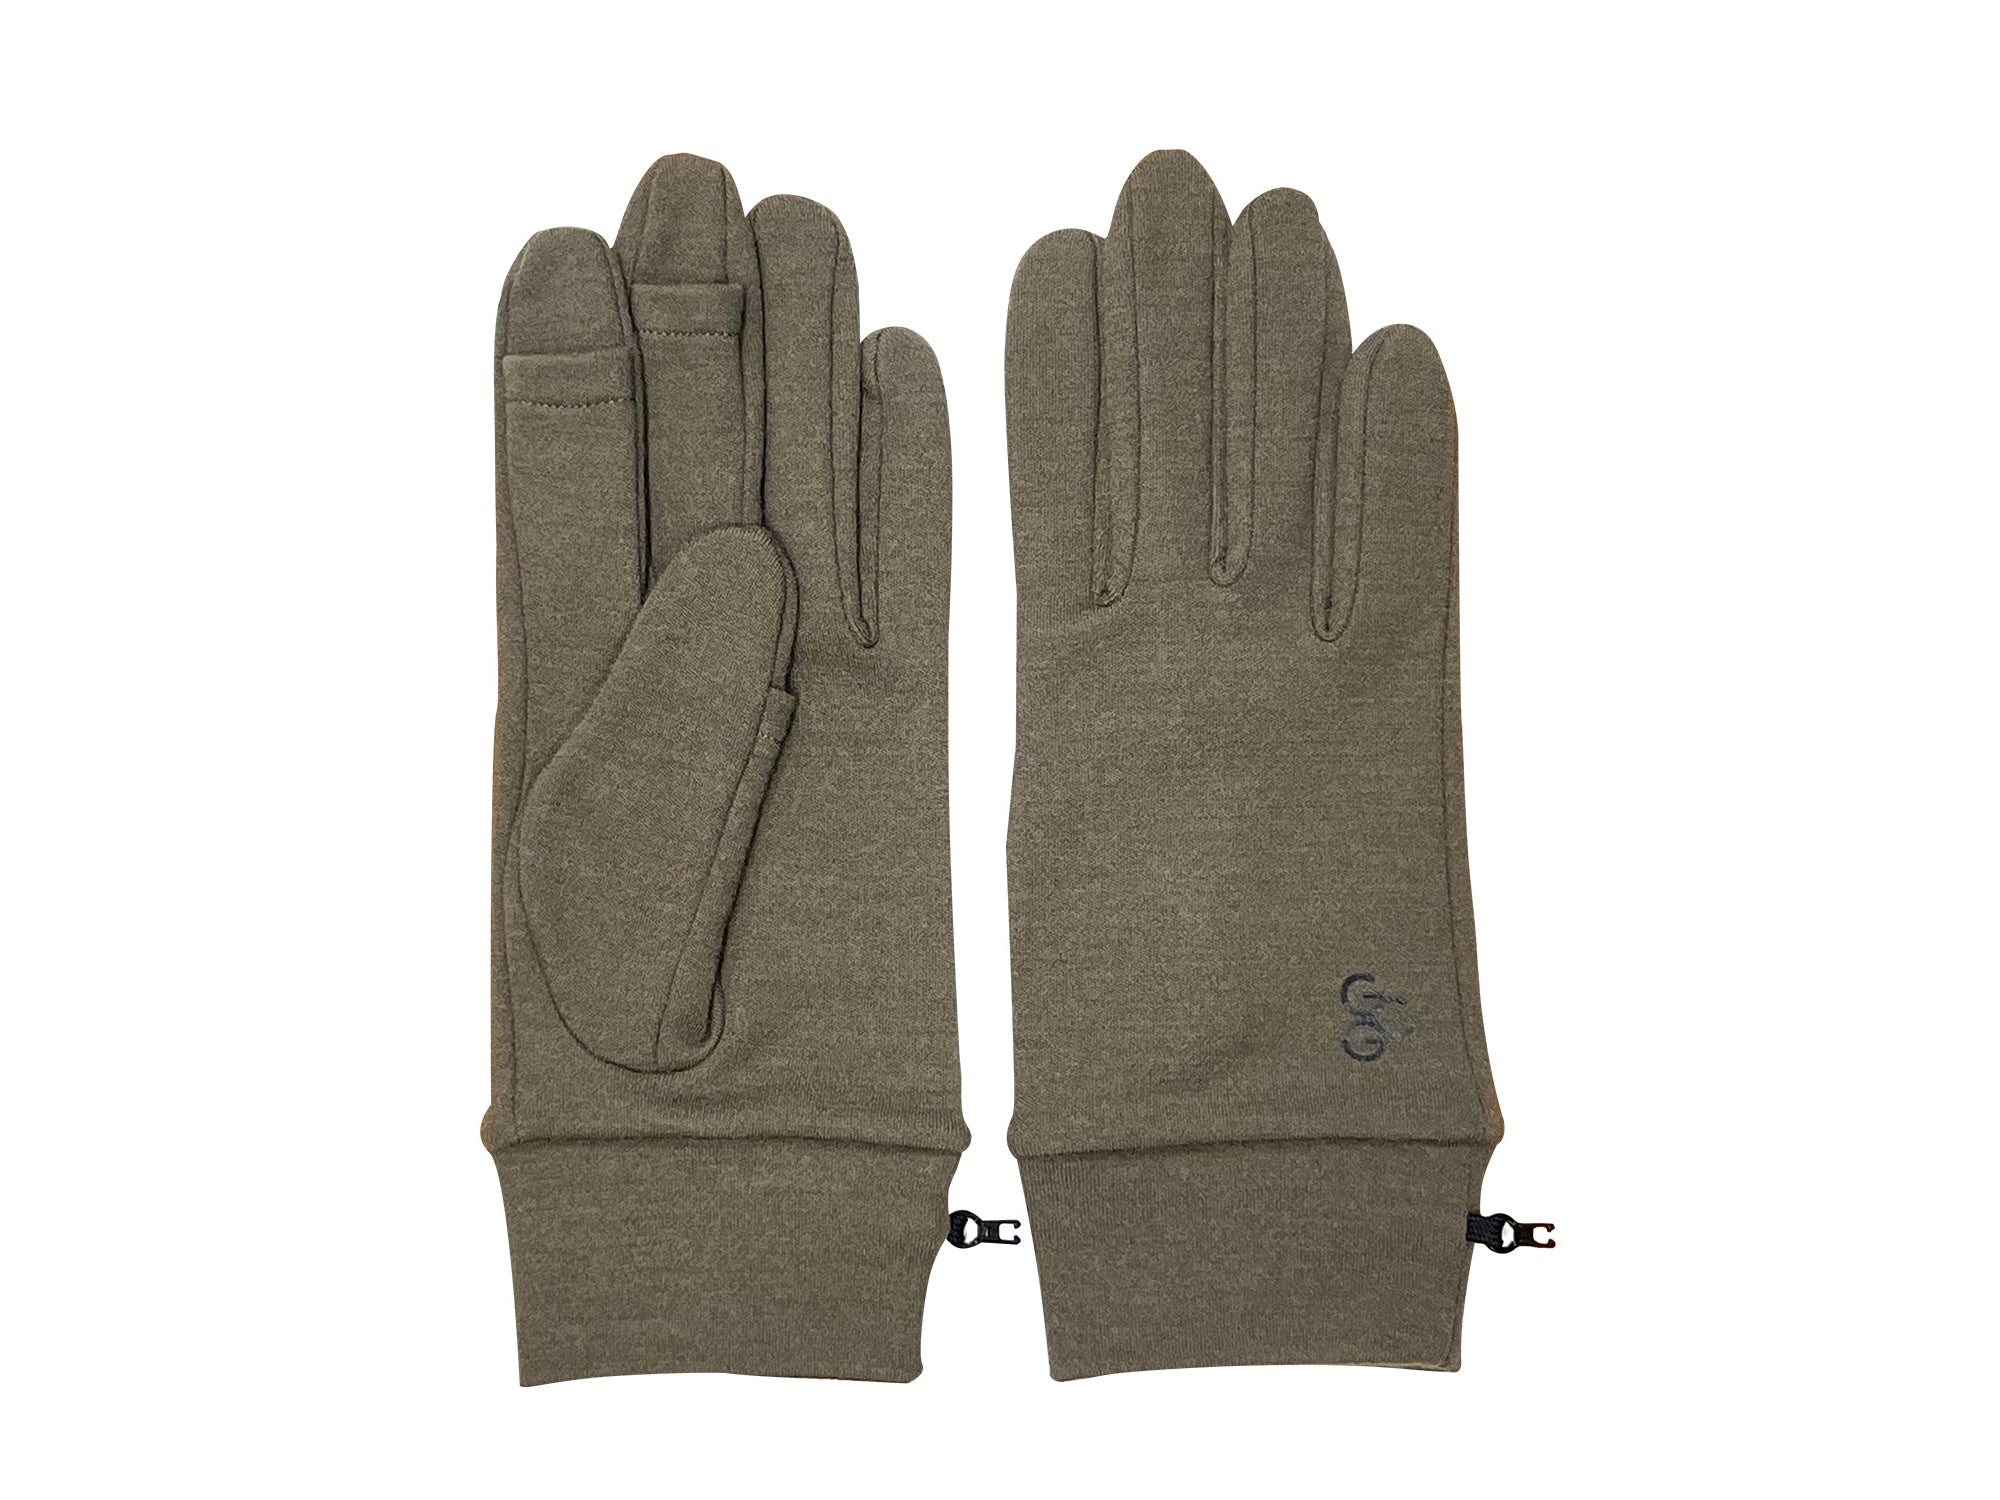 ［P.O.GLOVES］chic 3.0：Charcoal